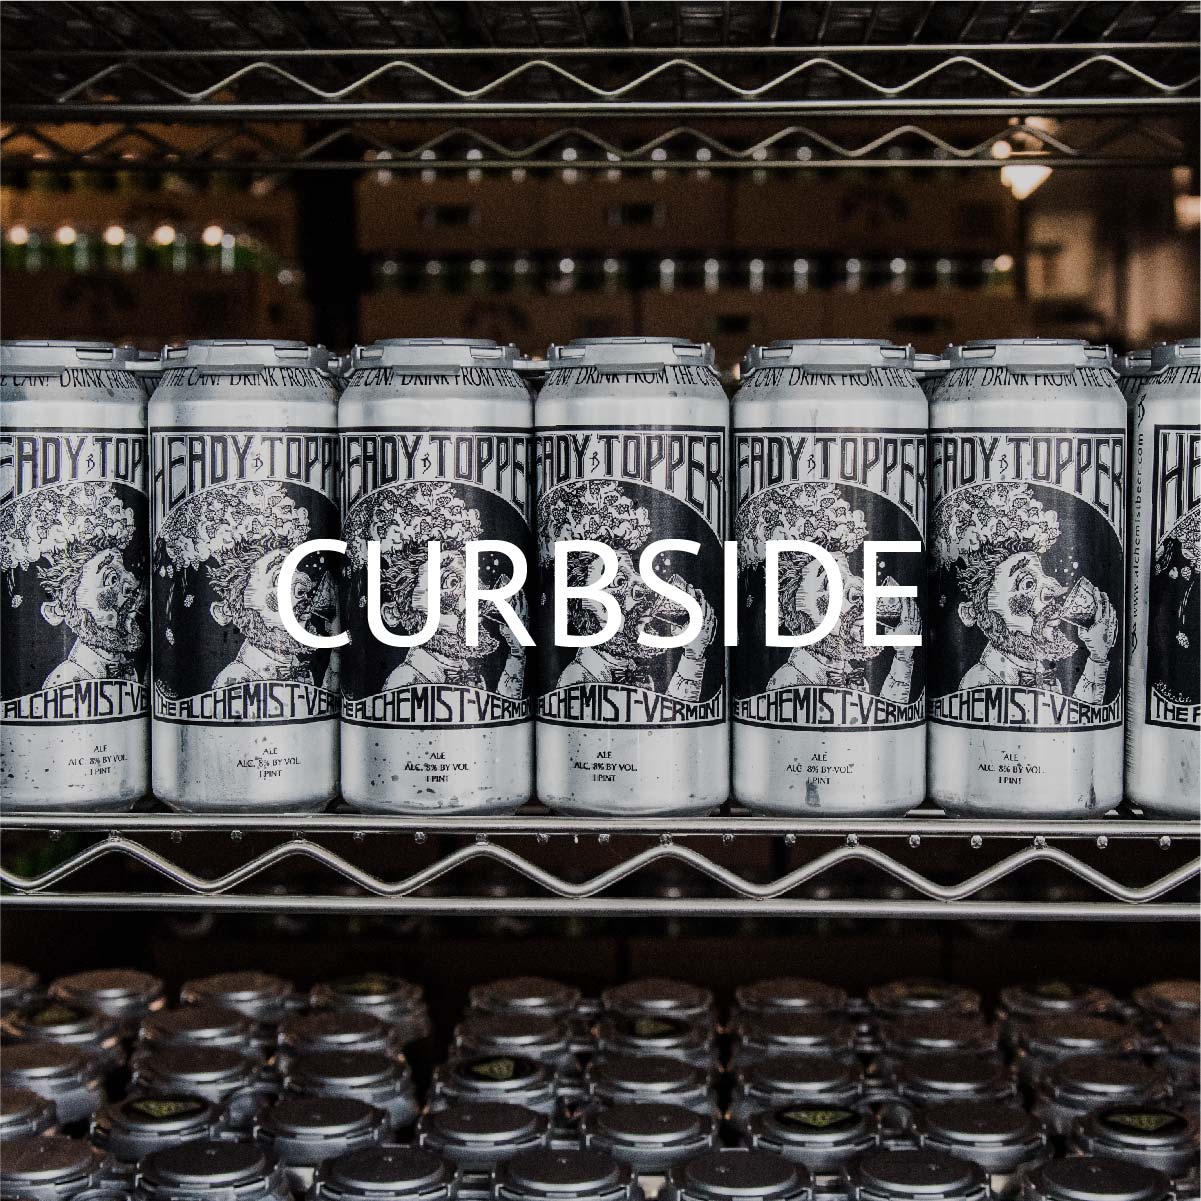 Click to learn more about curbside pickup at the Alchemist